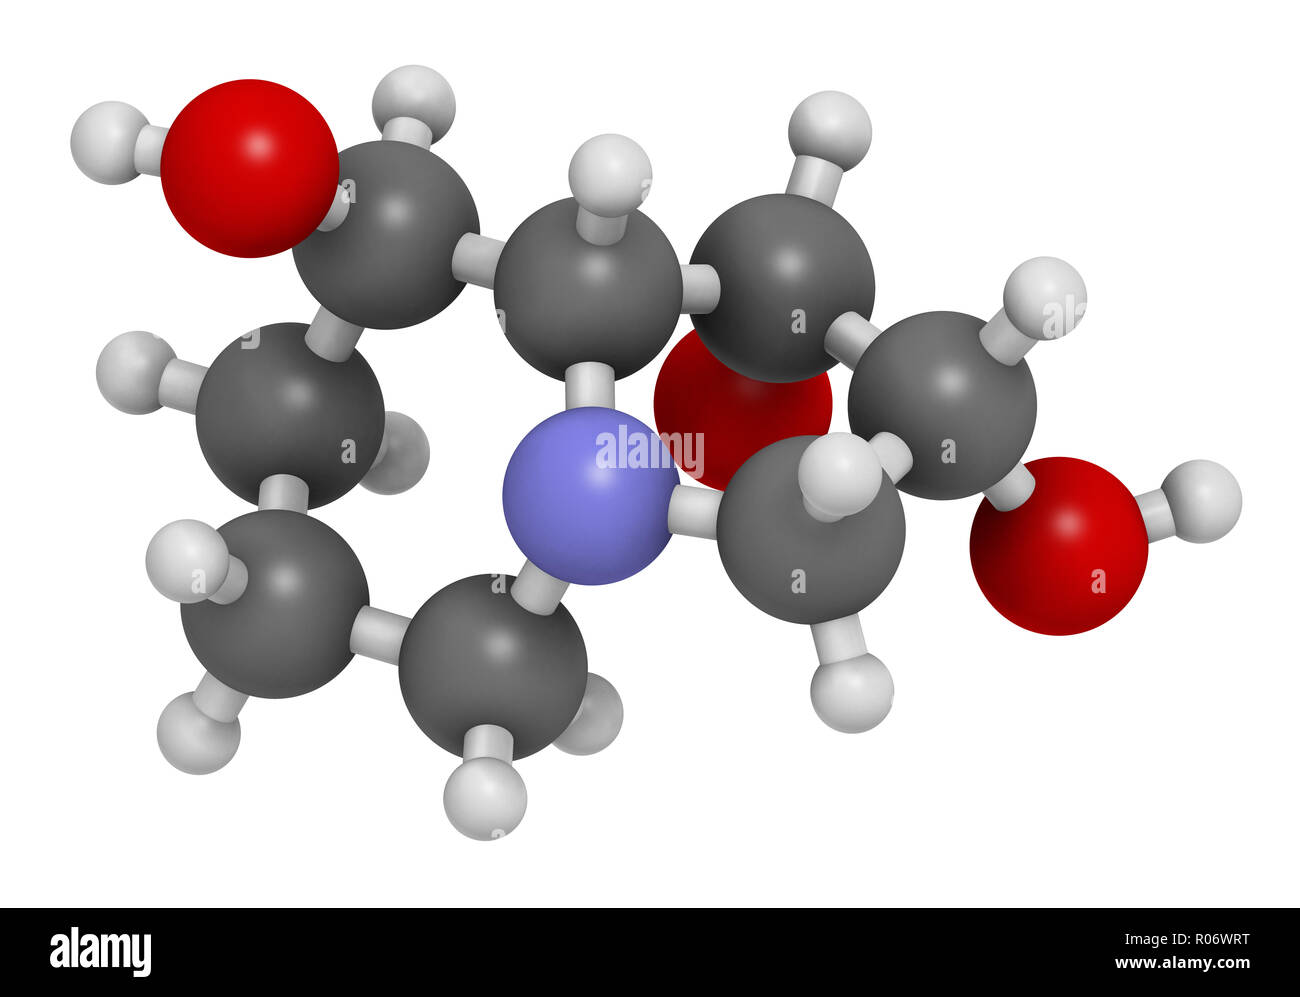 Swainsonine locoweed toxin molecule. Present in Astragalus, Oxytropis and Swainsona plant species. 3D rendering. Atoms are represented as spheres with Stock Photo